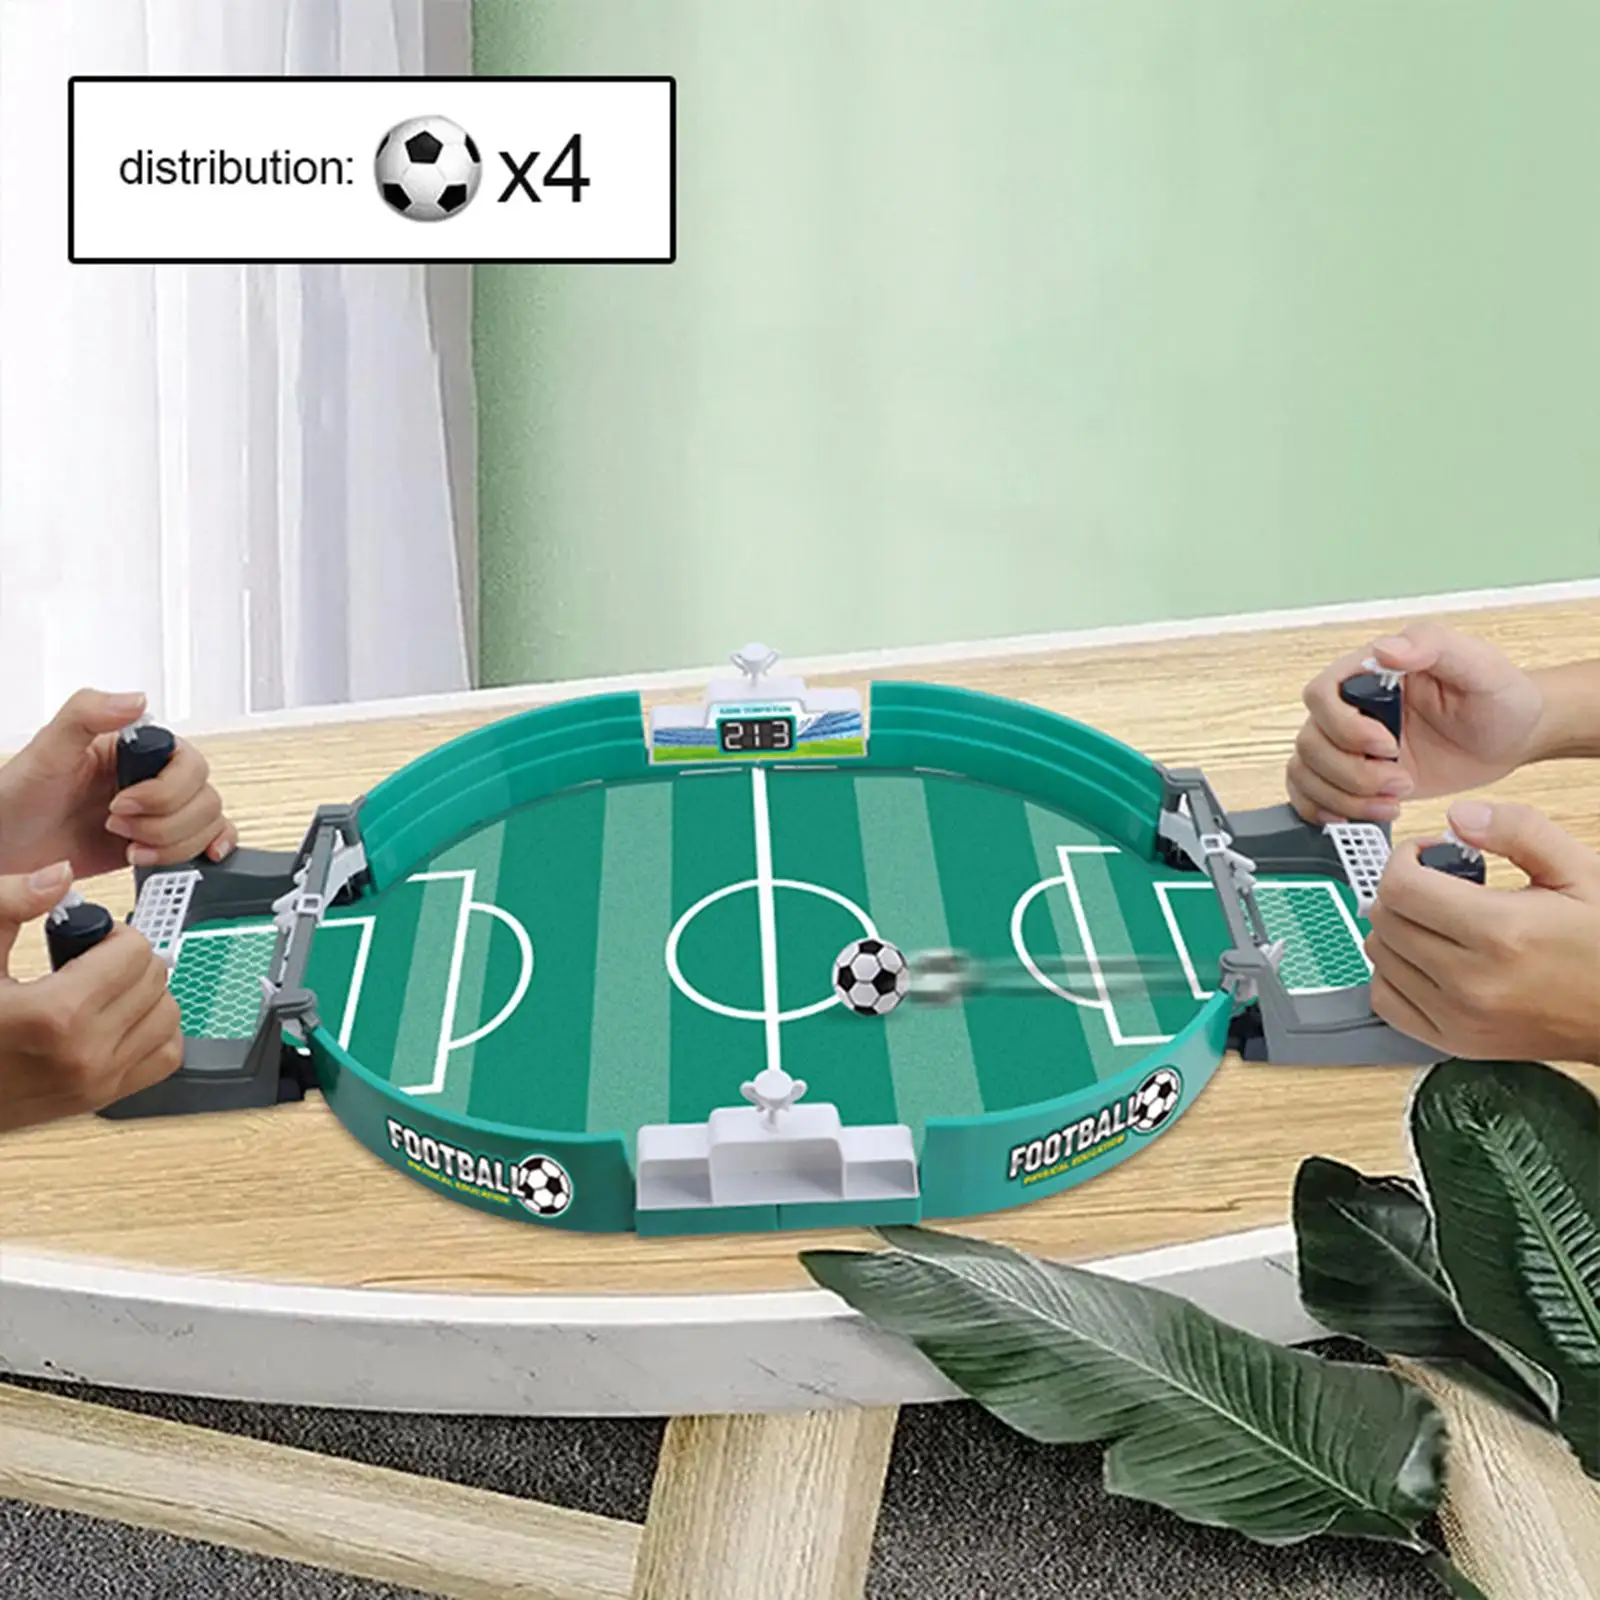 Soccertop Game Interactive Toy Sport Game Football Board Game for Family Game Kids Adults Two Players Entertainment Party